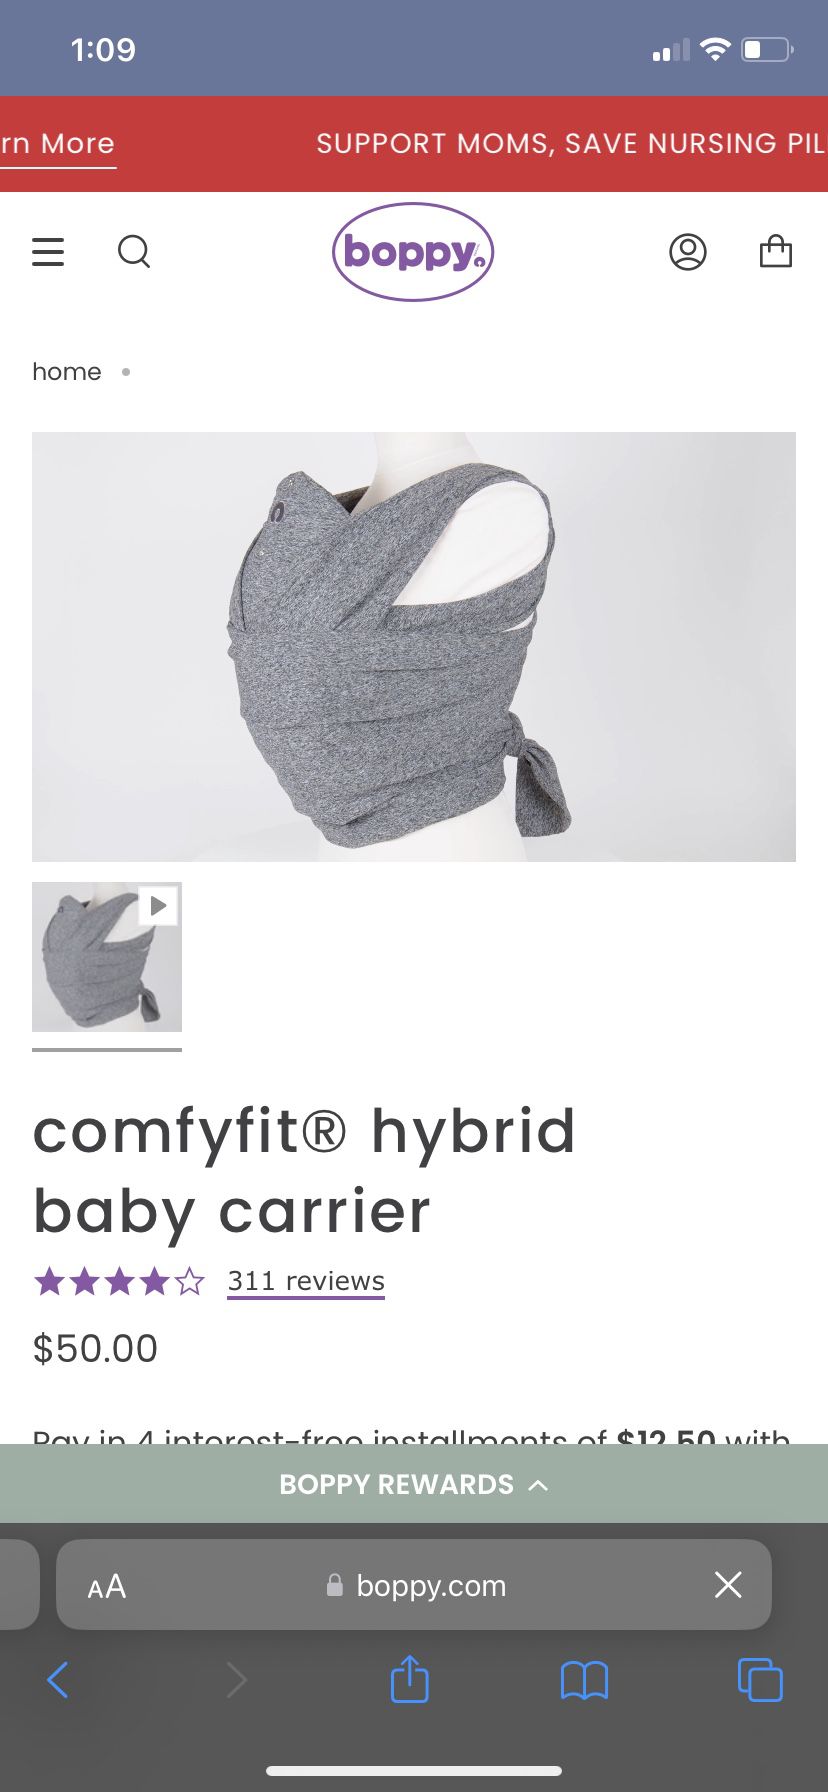 Comfy fit Hybrid Baby Carrier